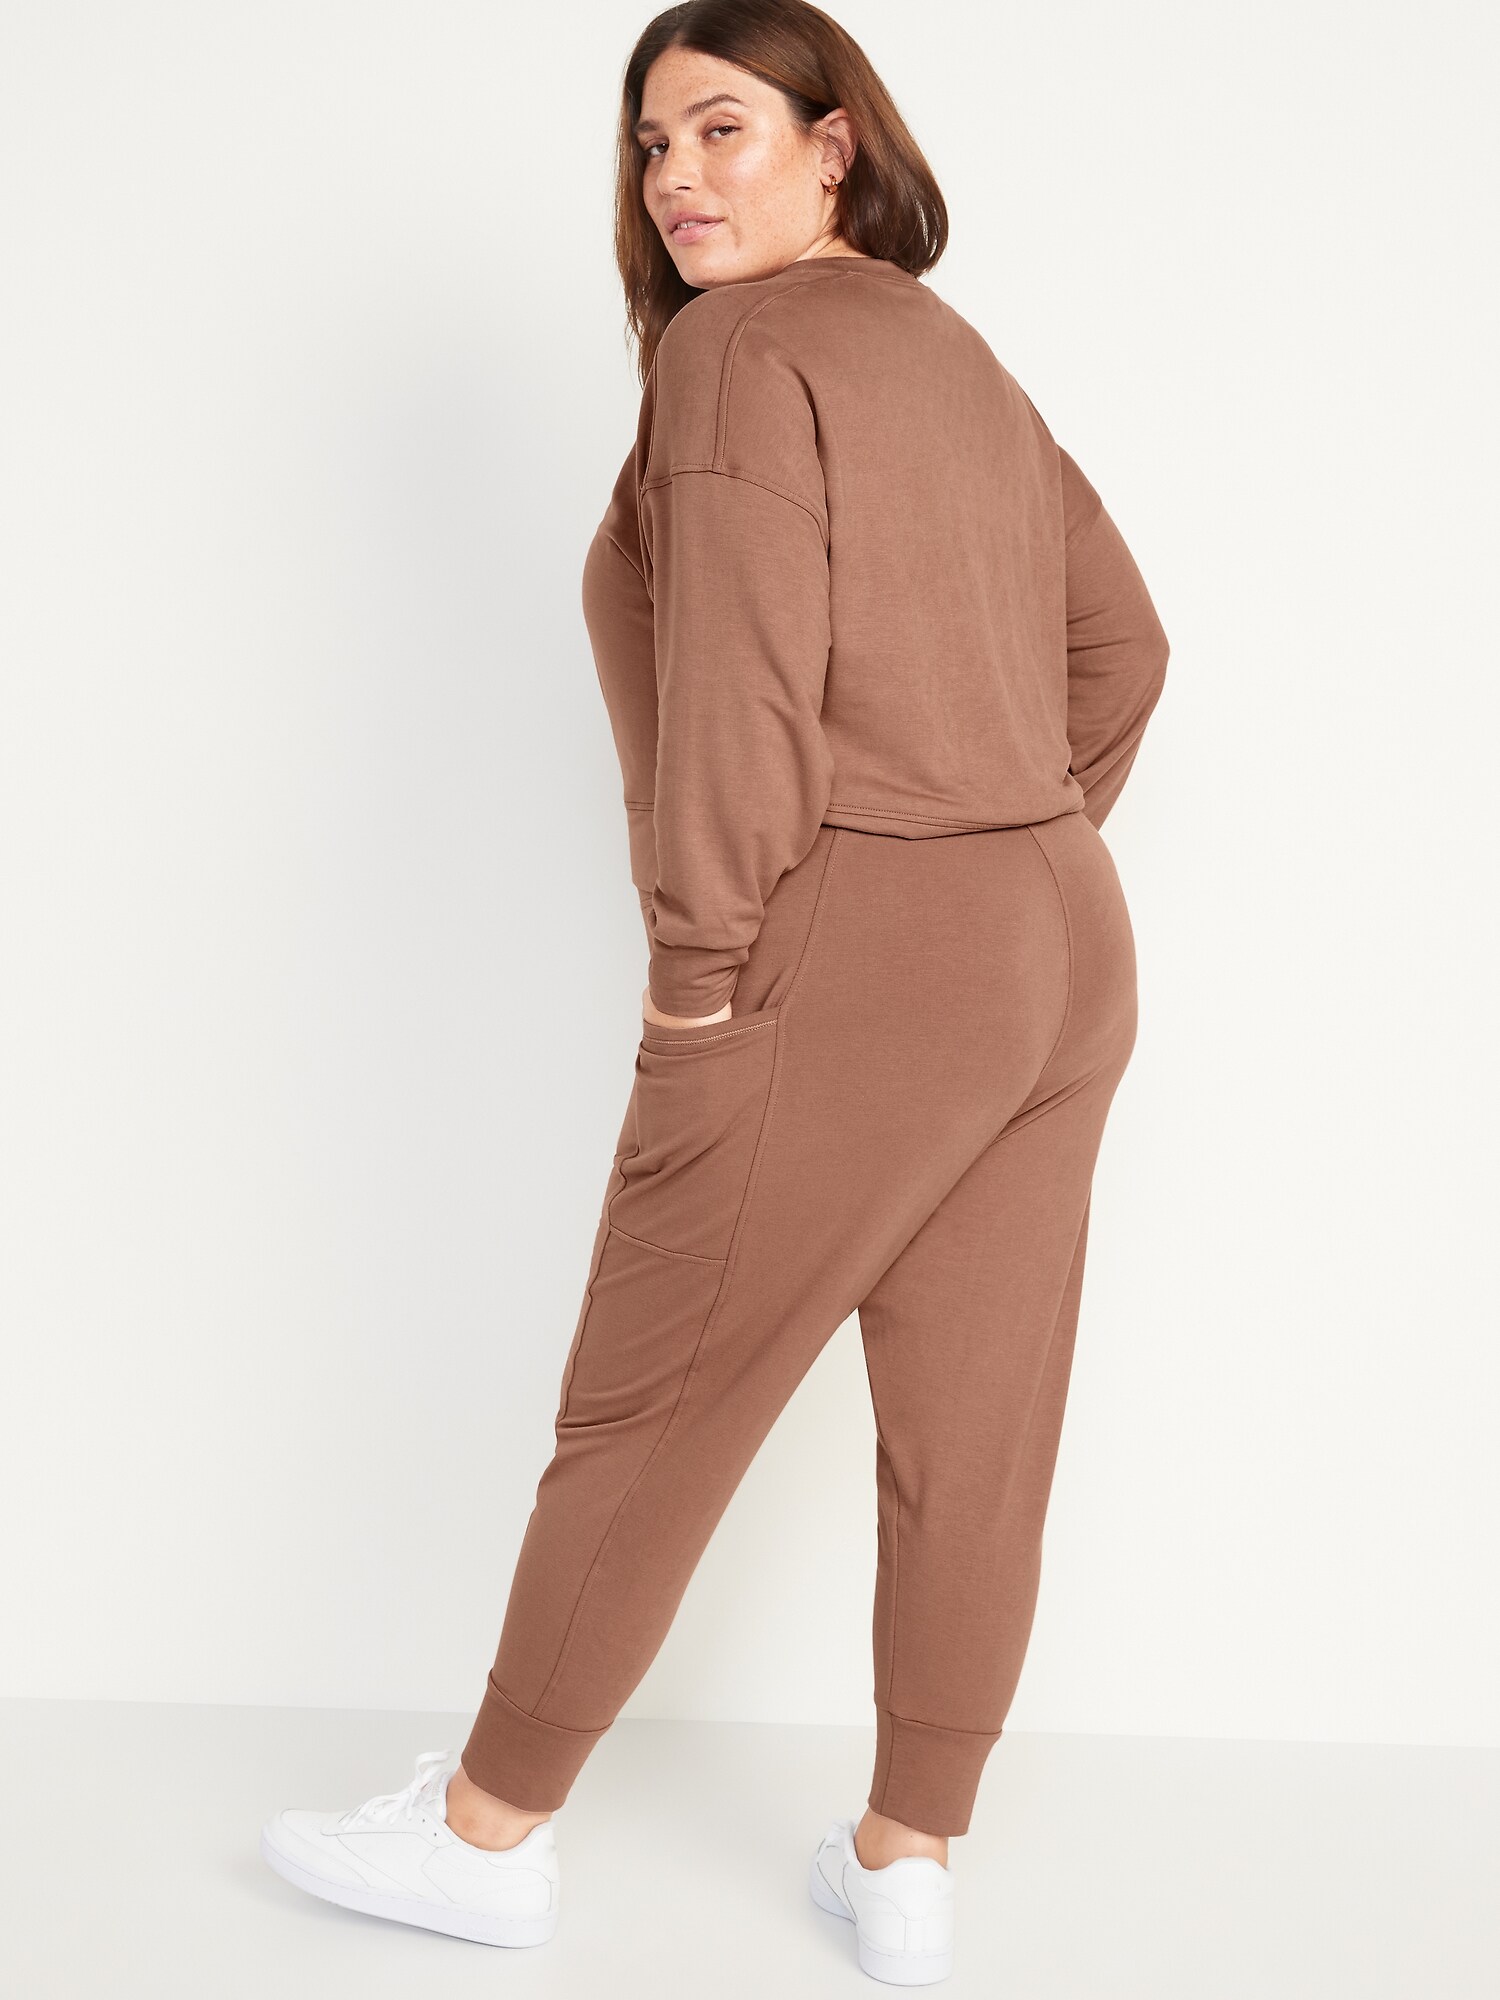 High-Waisted Live-In Jogger Sweatpants for Women